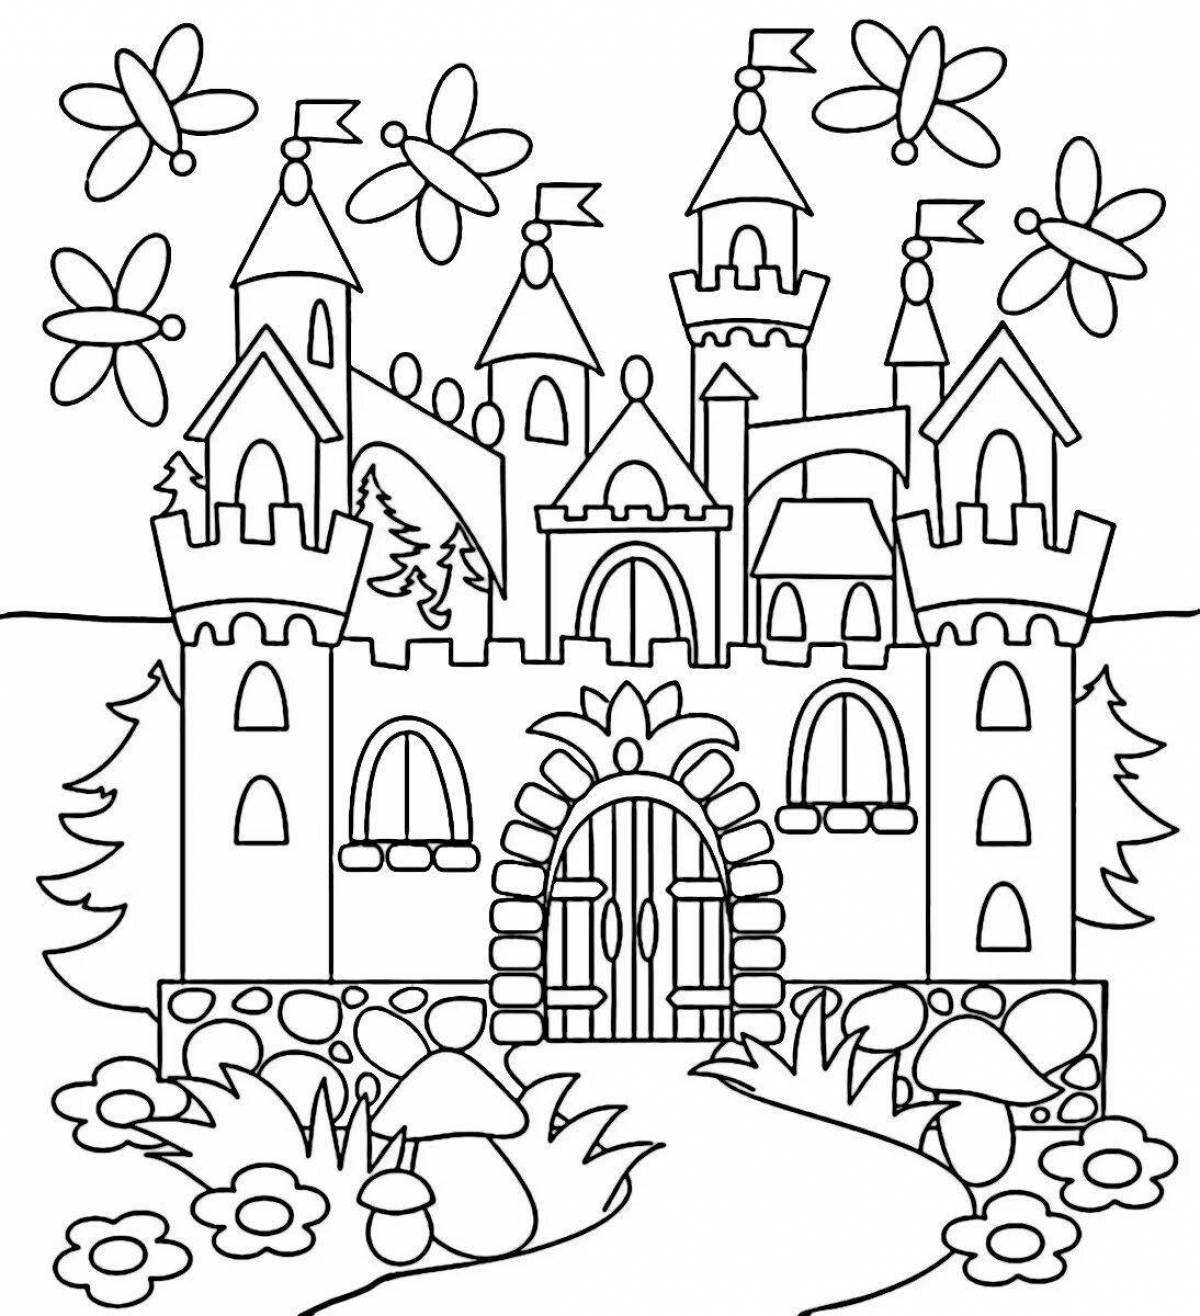 Shining city coloring book for kids